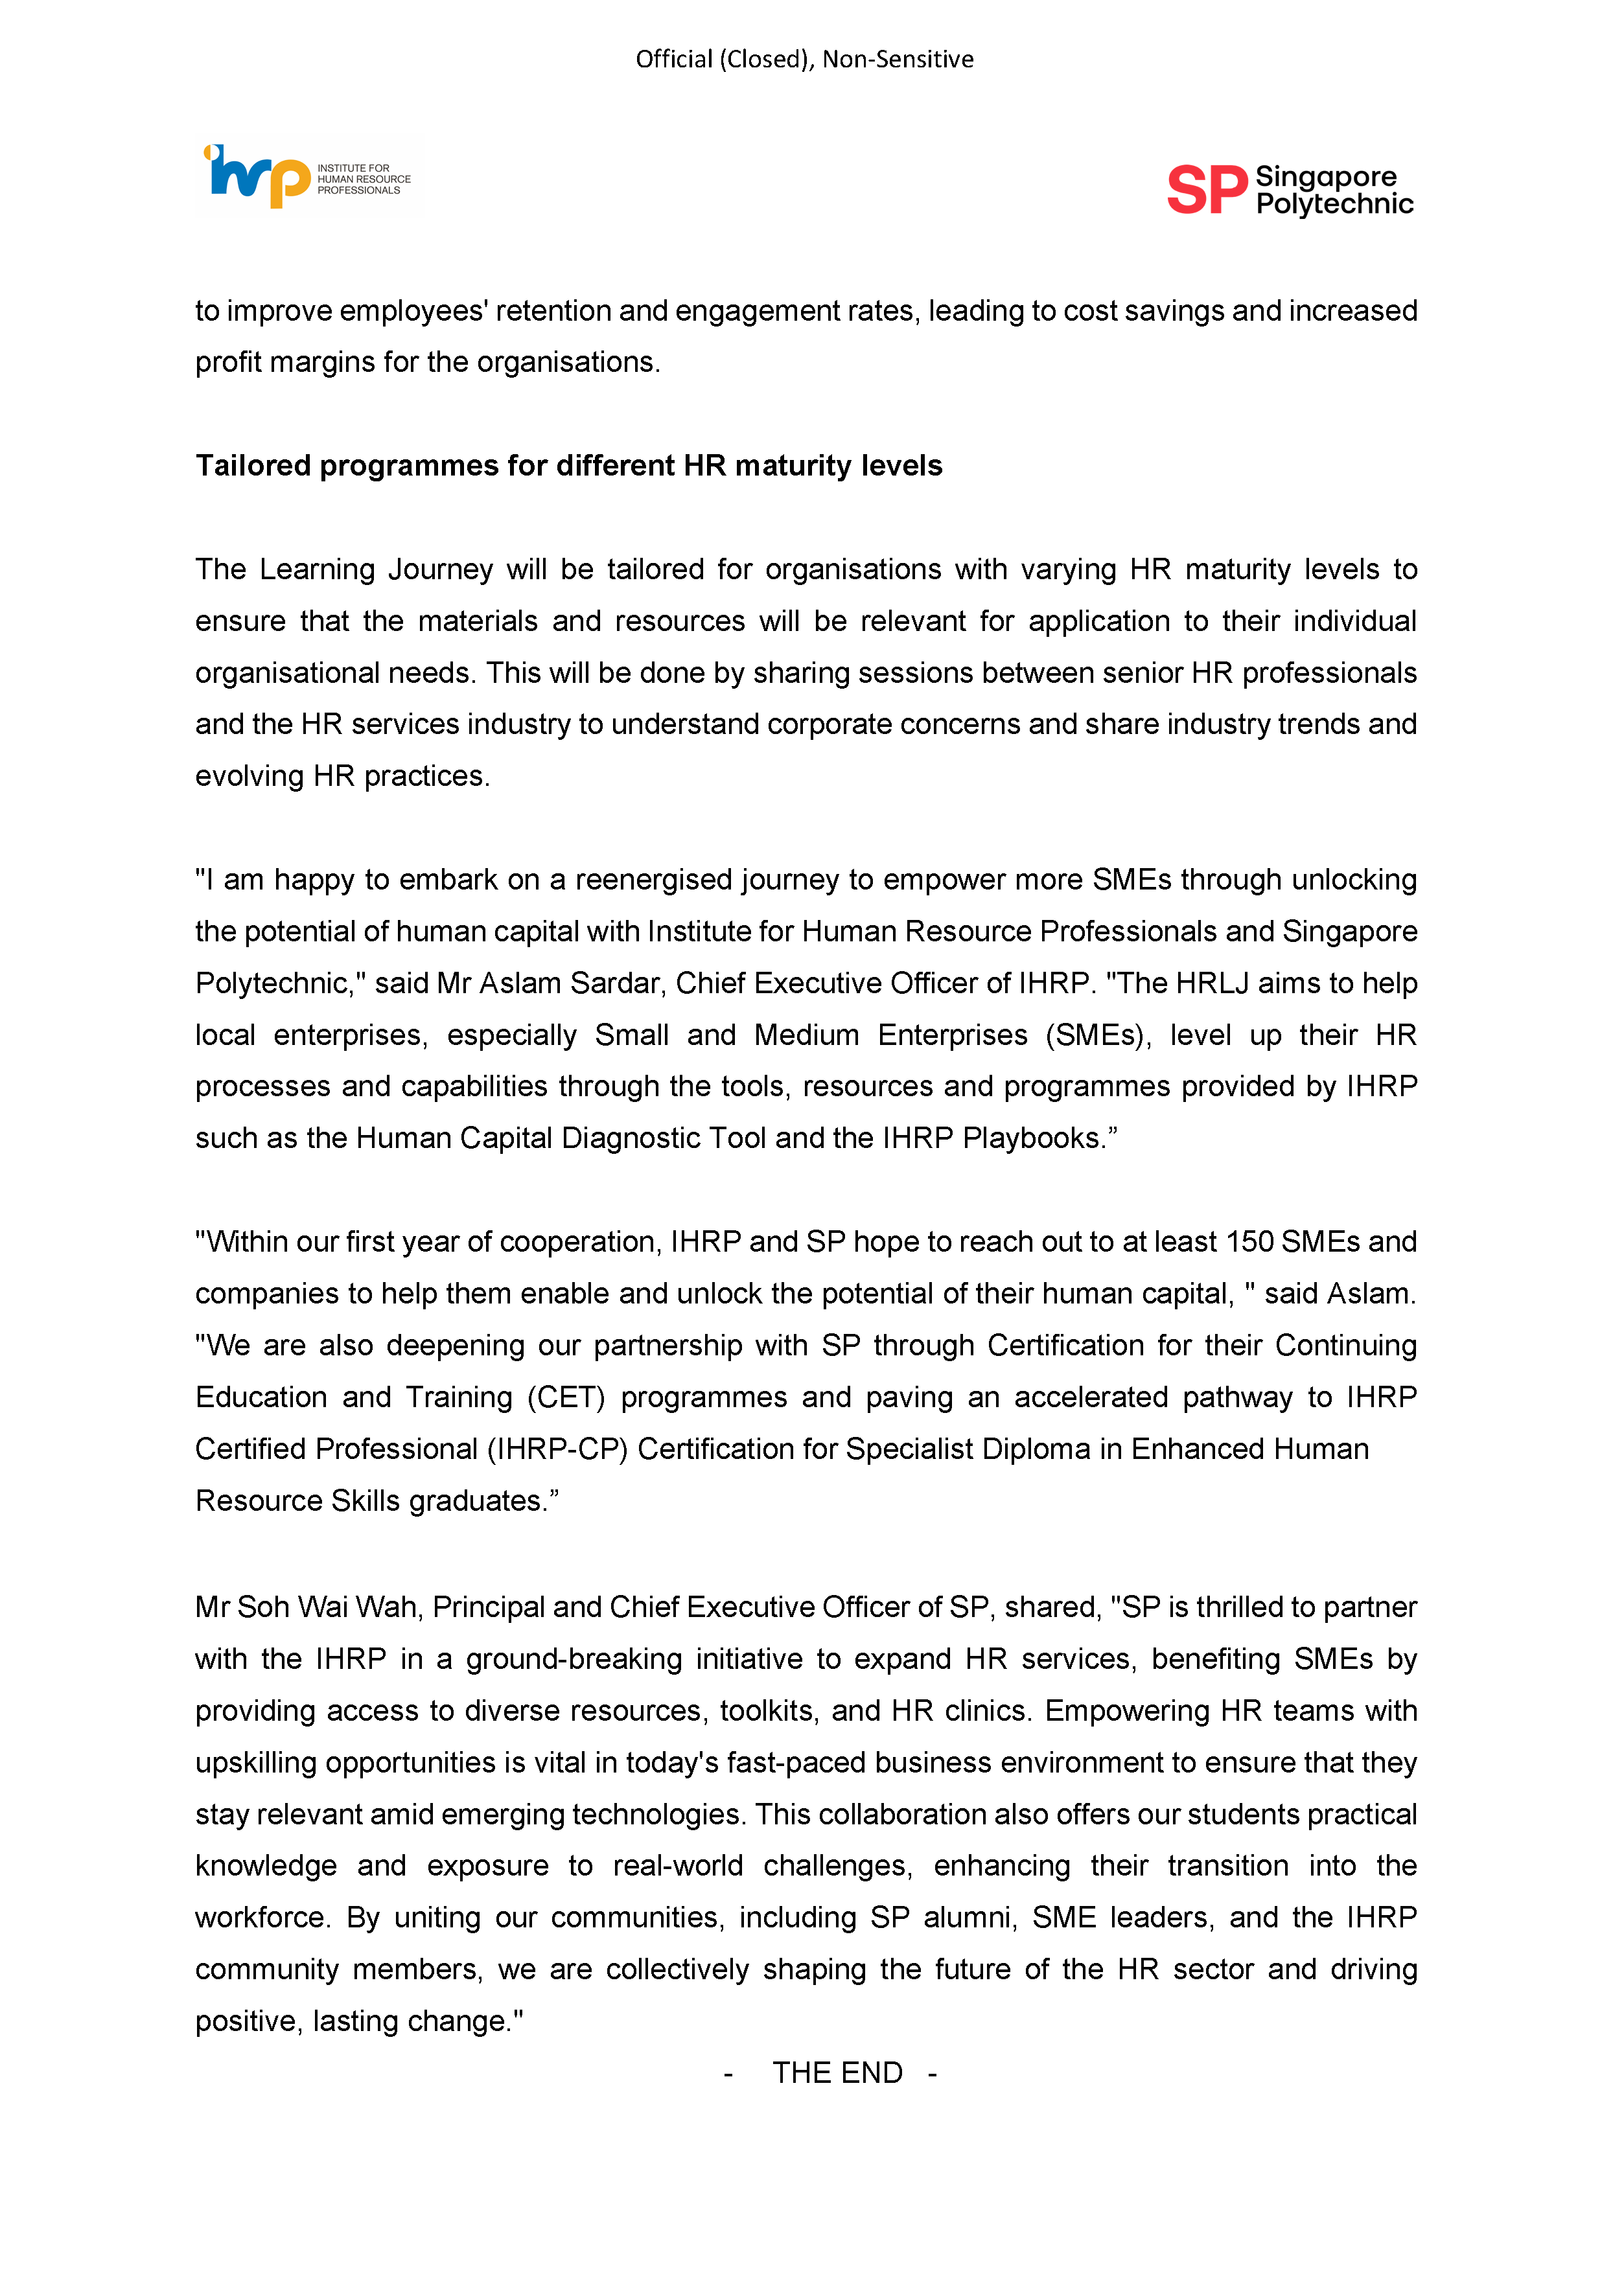 Press Release - Institute for Human Resource Professionals and Singapore Polytechnic launch a collaborative Human Resource Learning Journey_Page_2